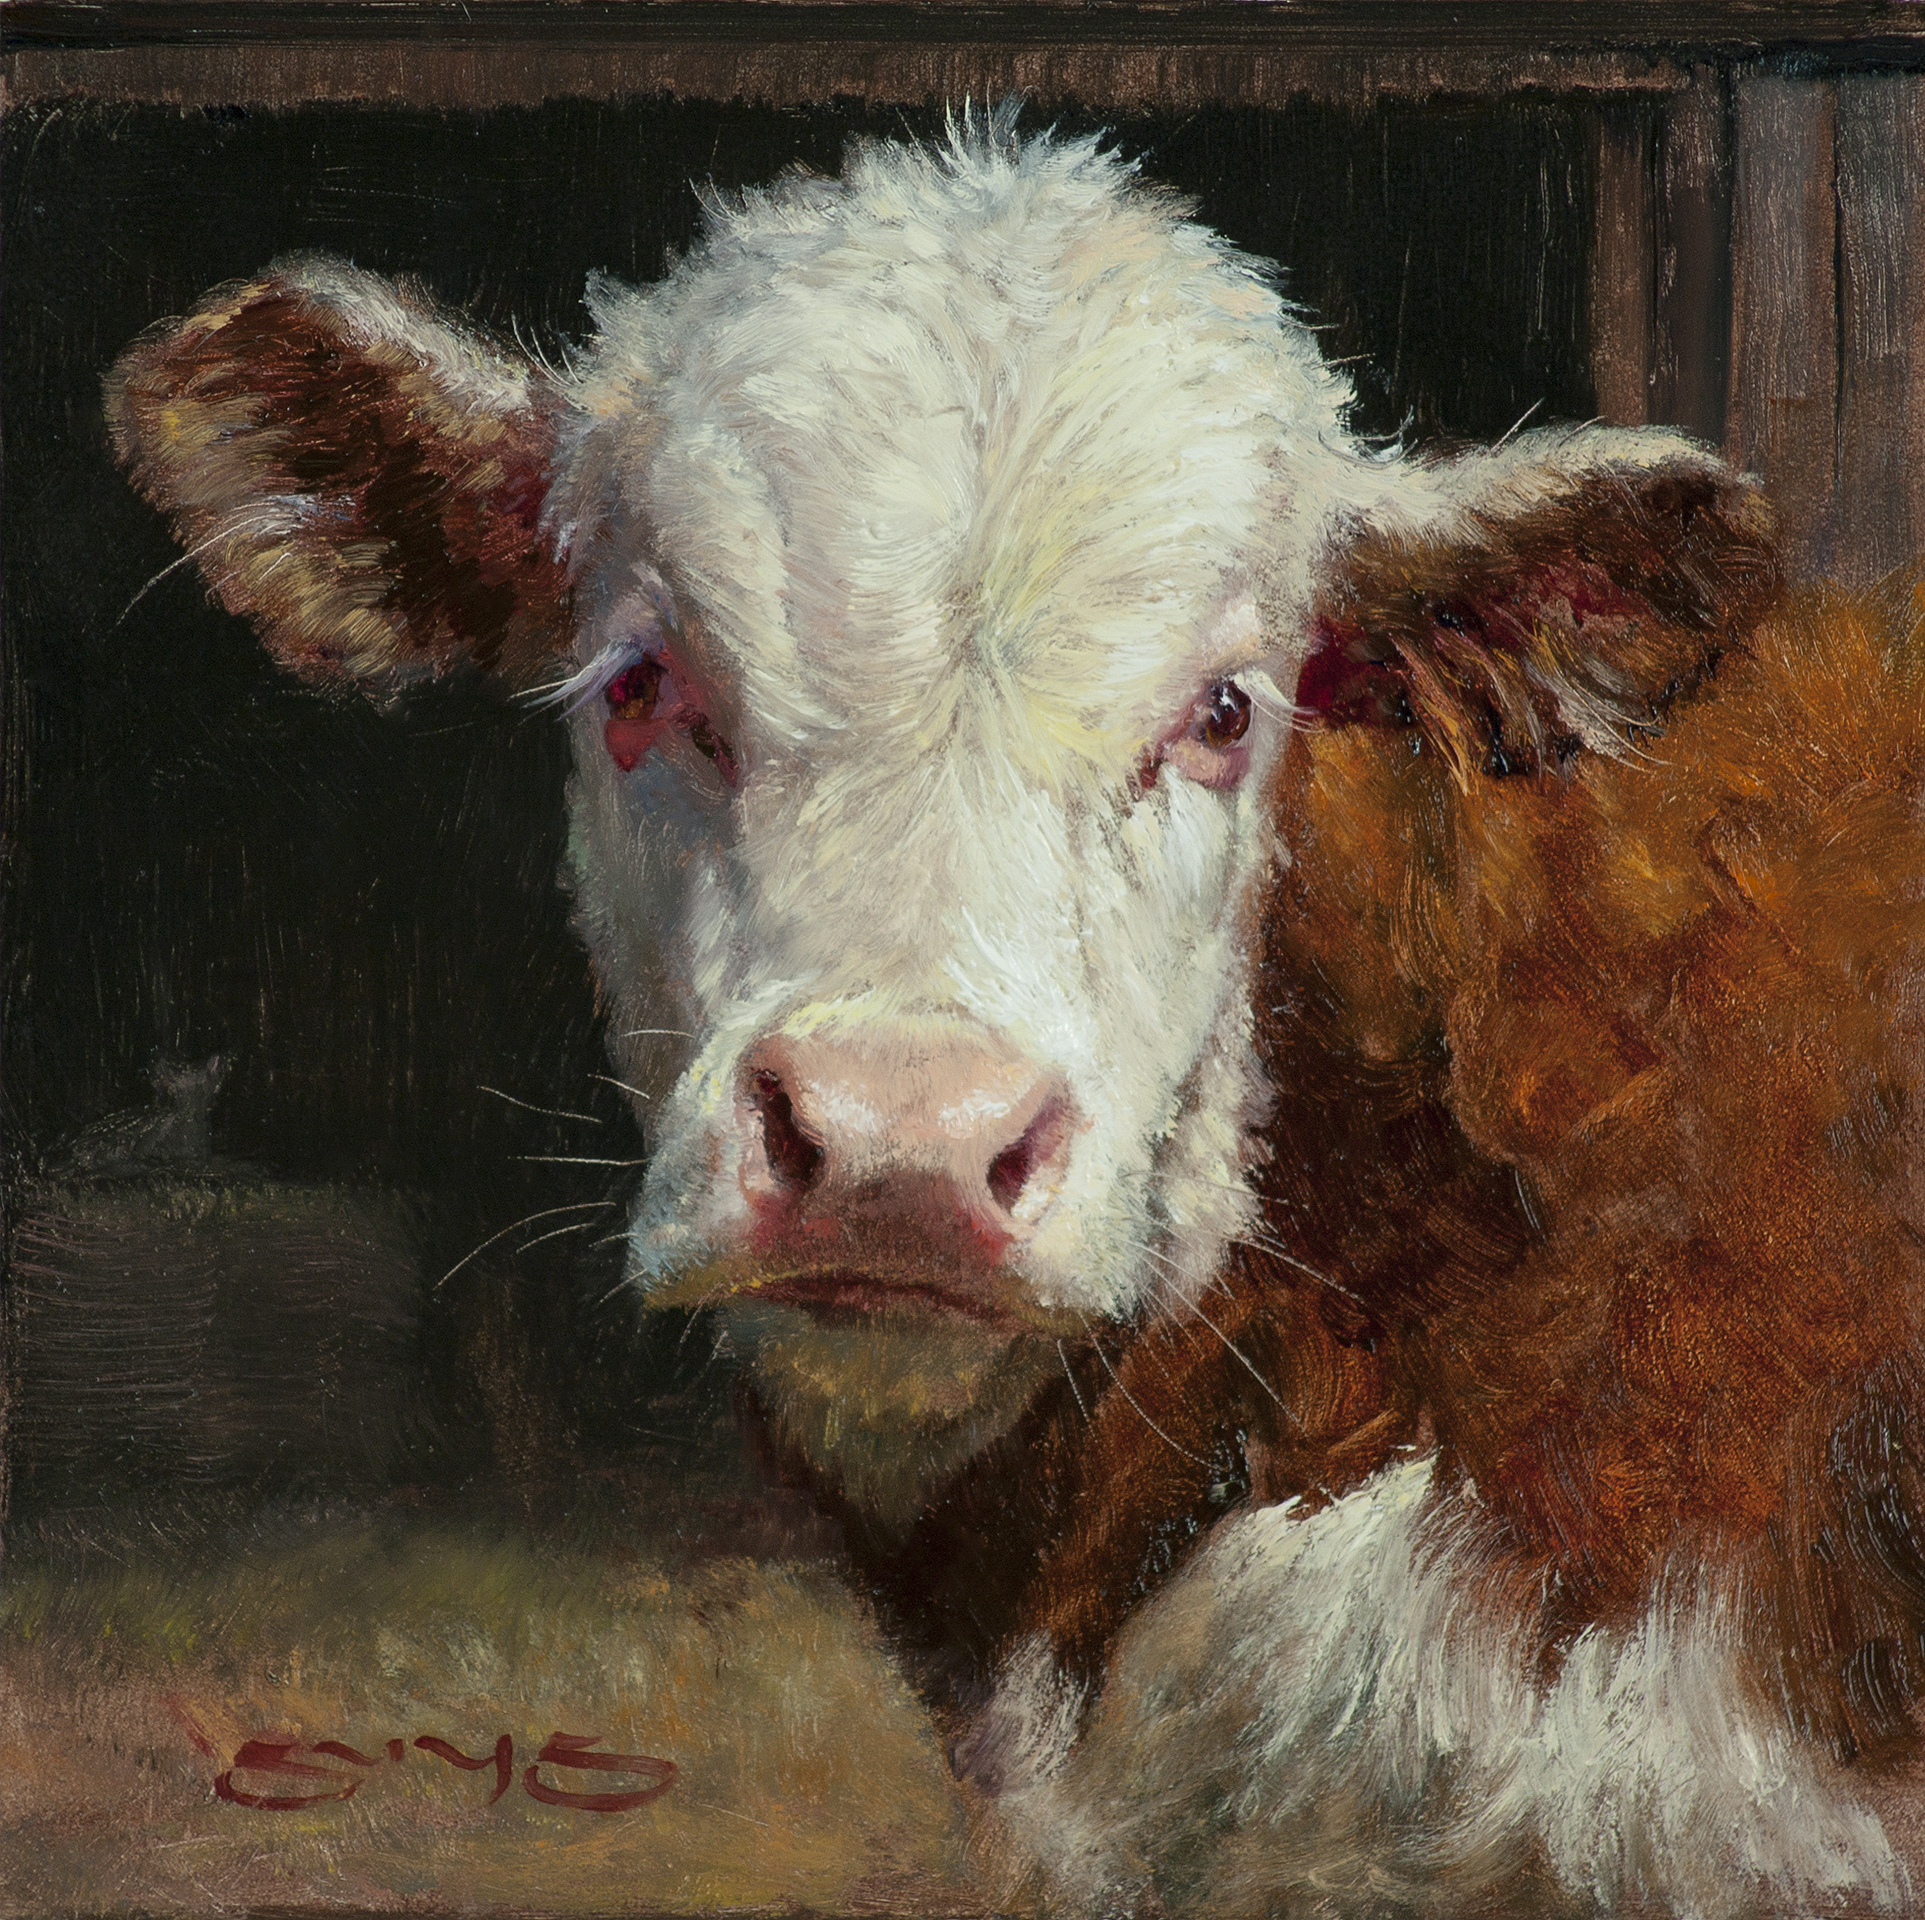 Represenational art - painting of a cow